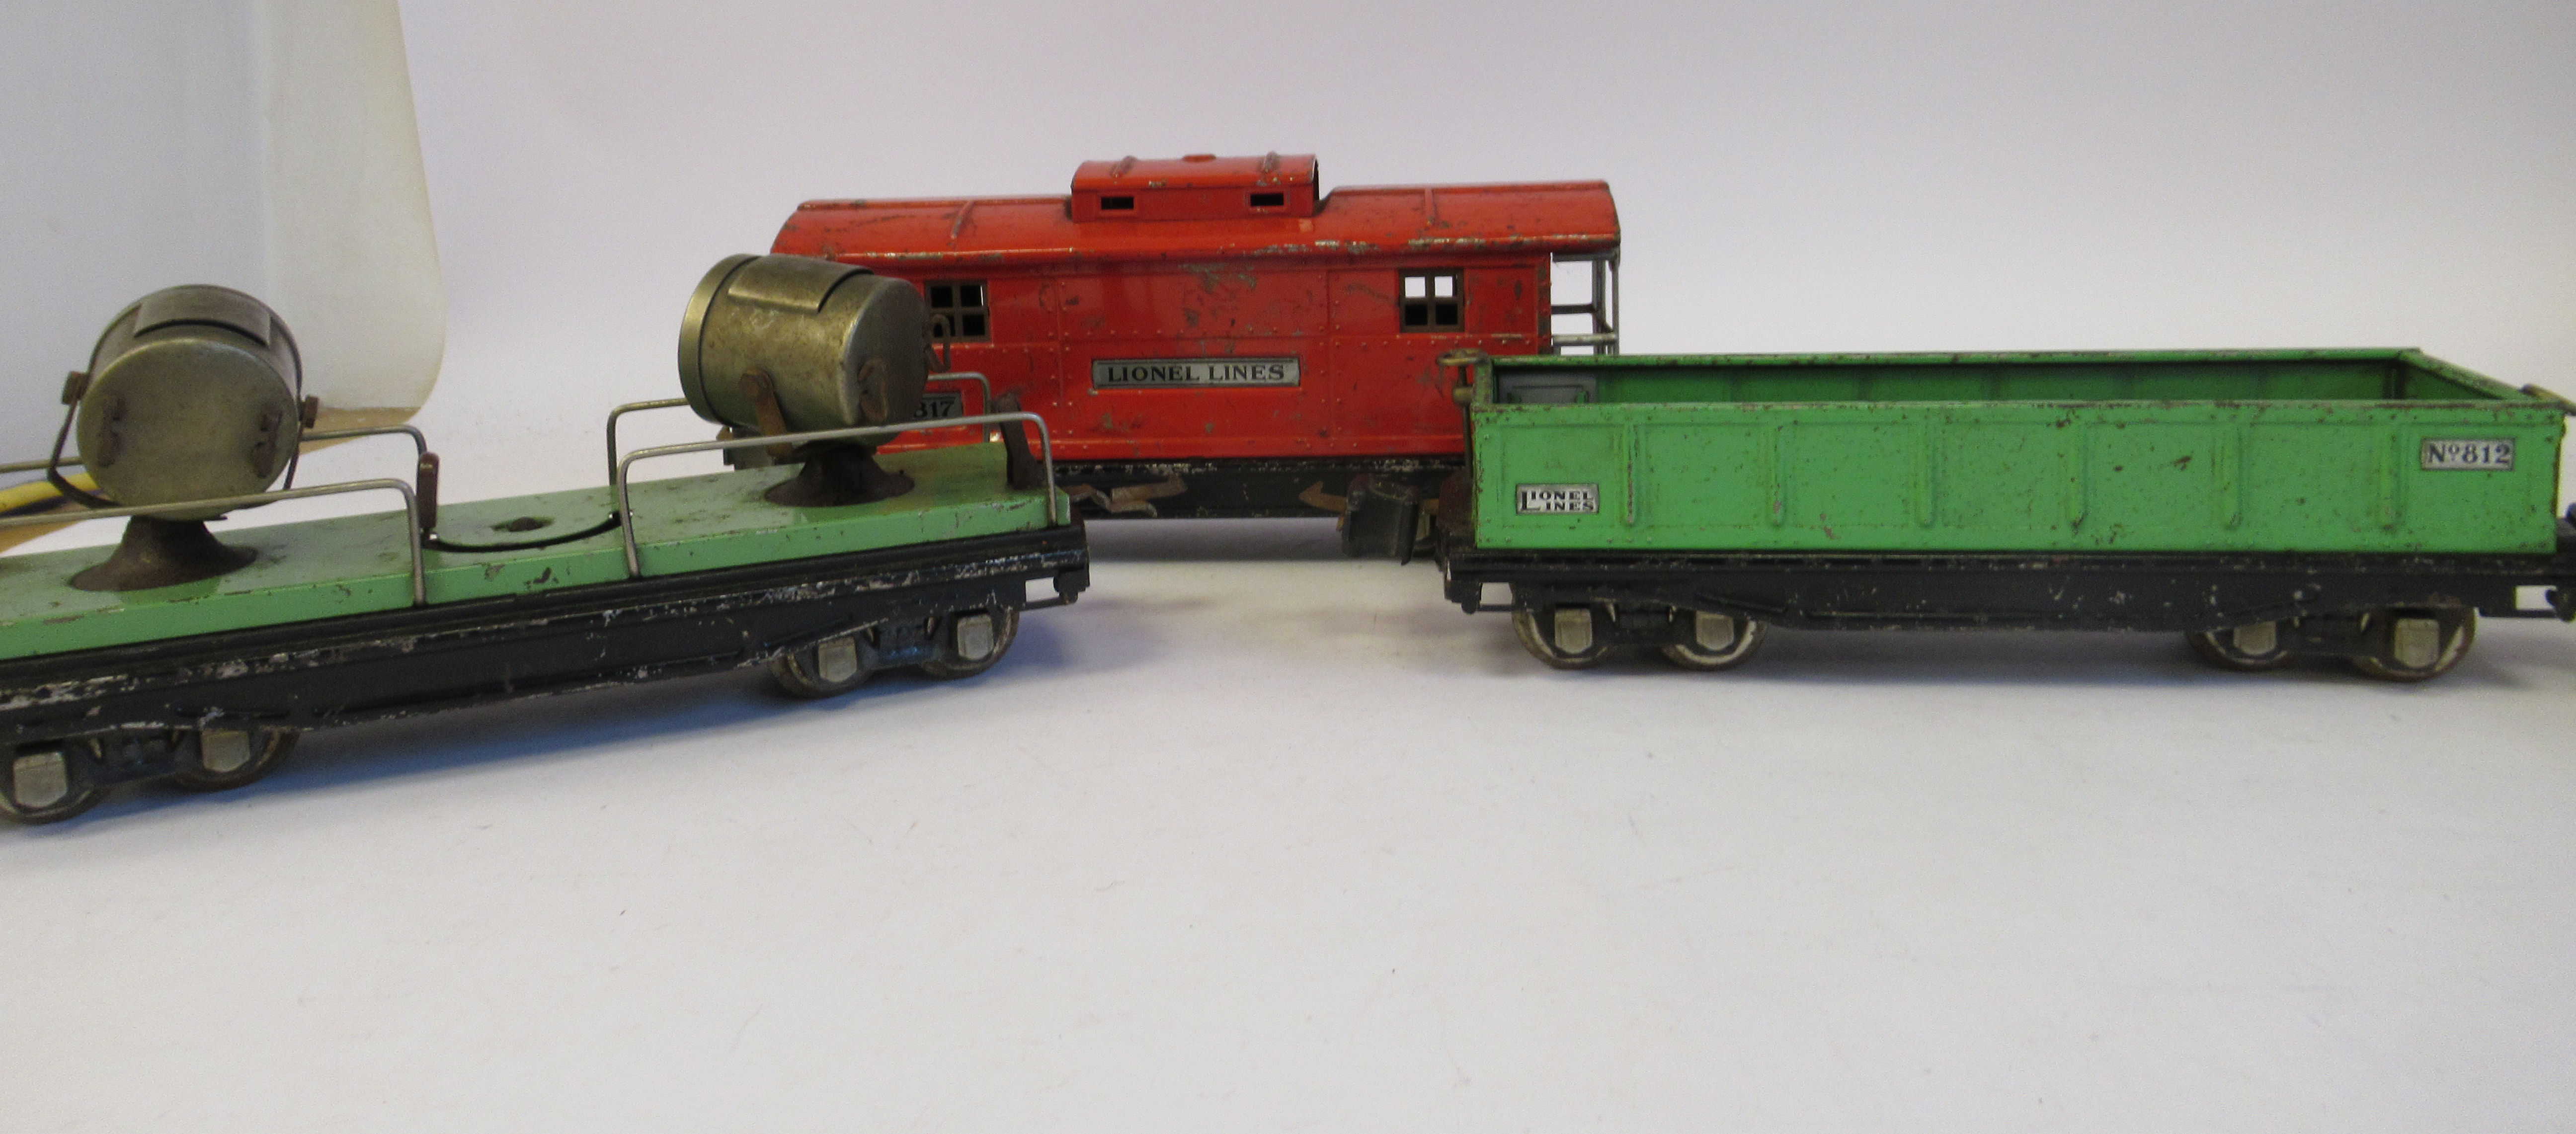 A Lionel Corporation NY, Lionel Lines 0 gauge electric 2-4-2 model railway locomotive and tender - Image 7 of 12